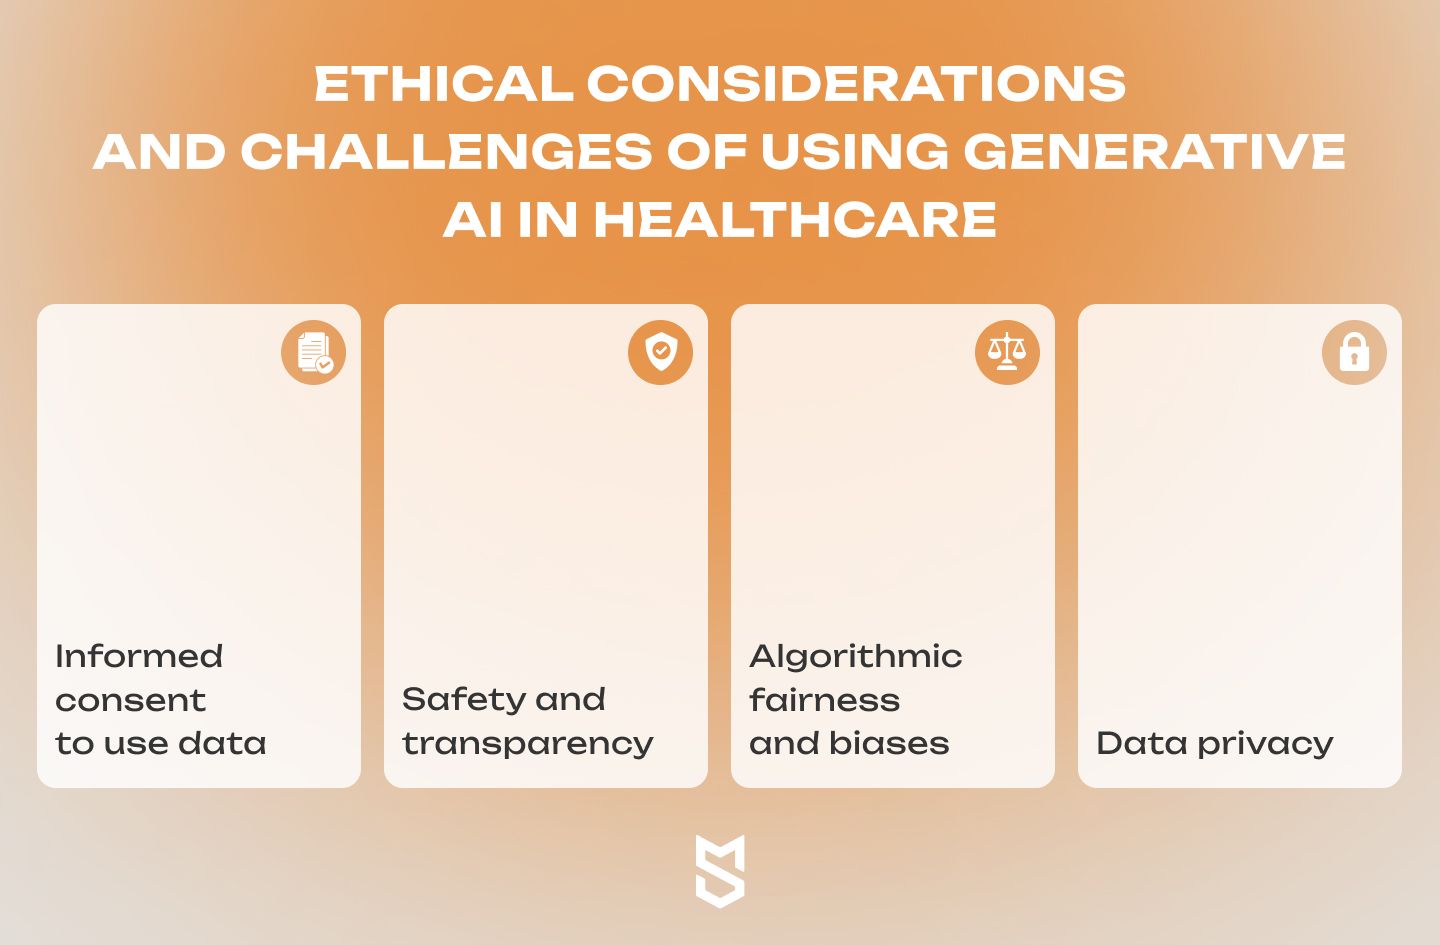 Ethical considerations and challenges of using generative AI in healthcare